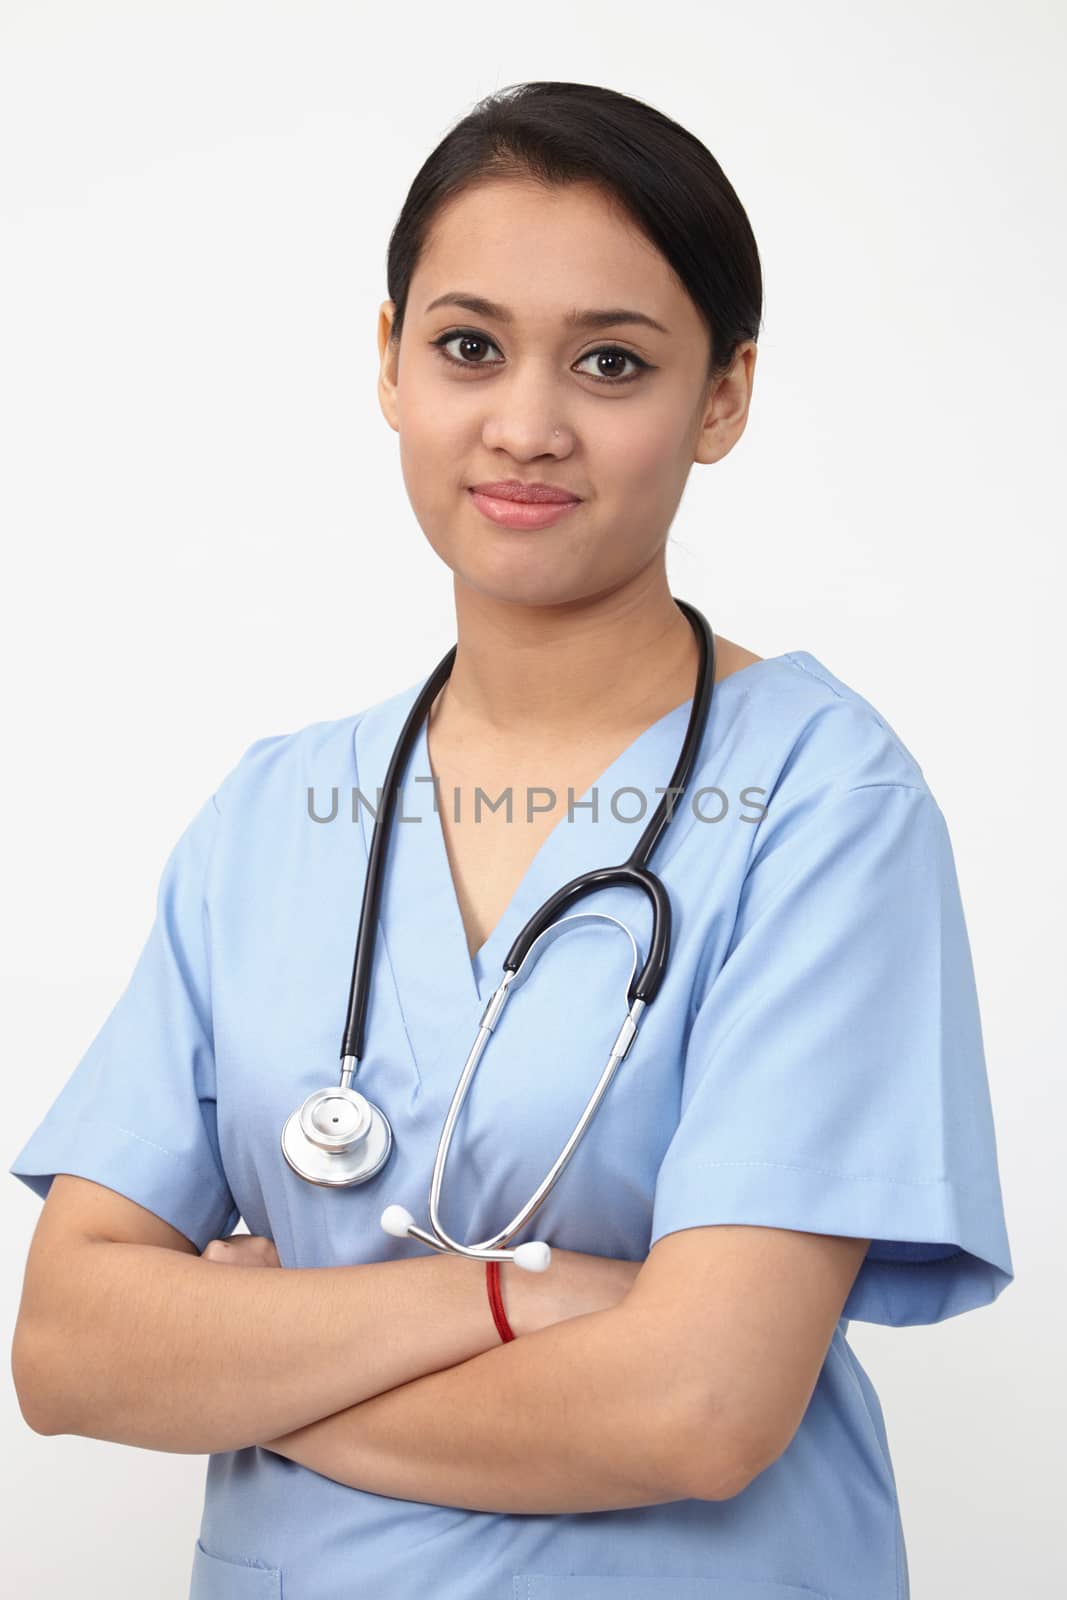 portrait of the nurse or doctor 